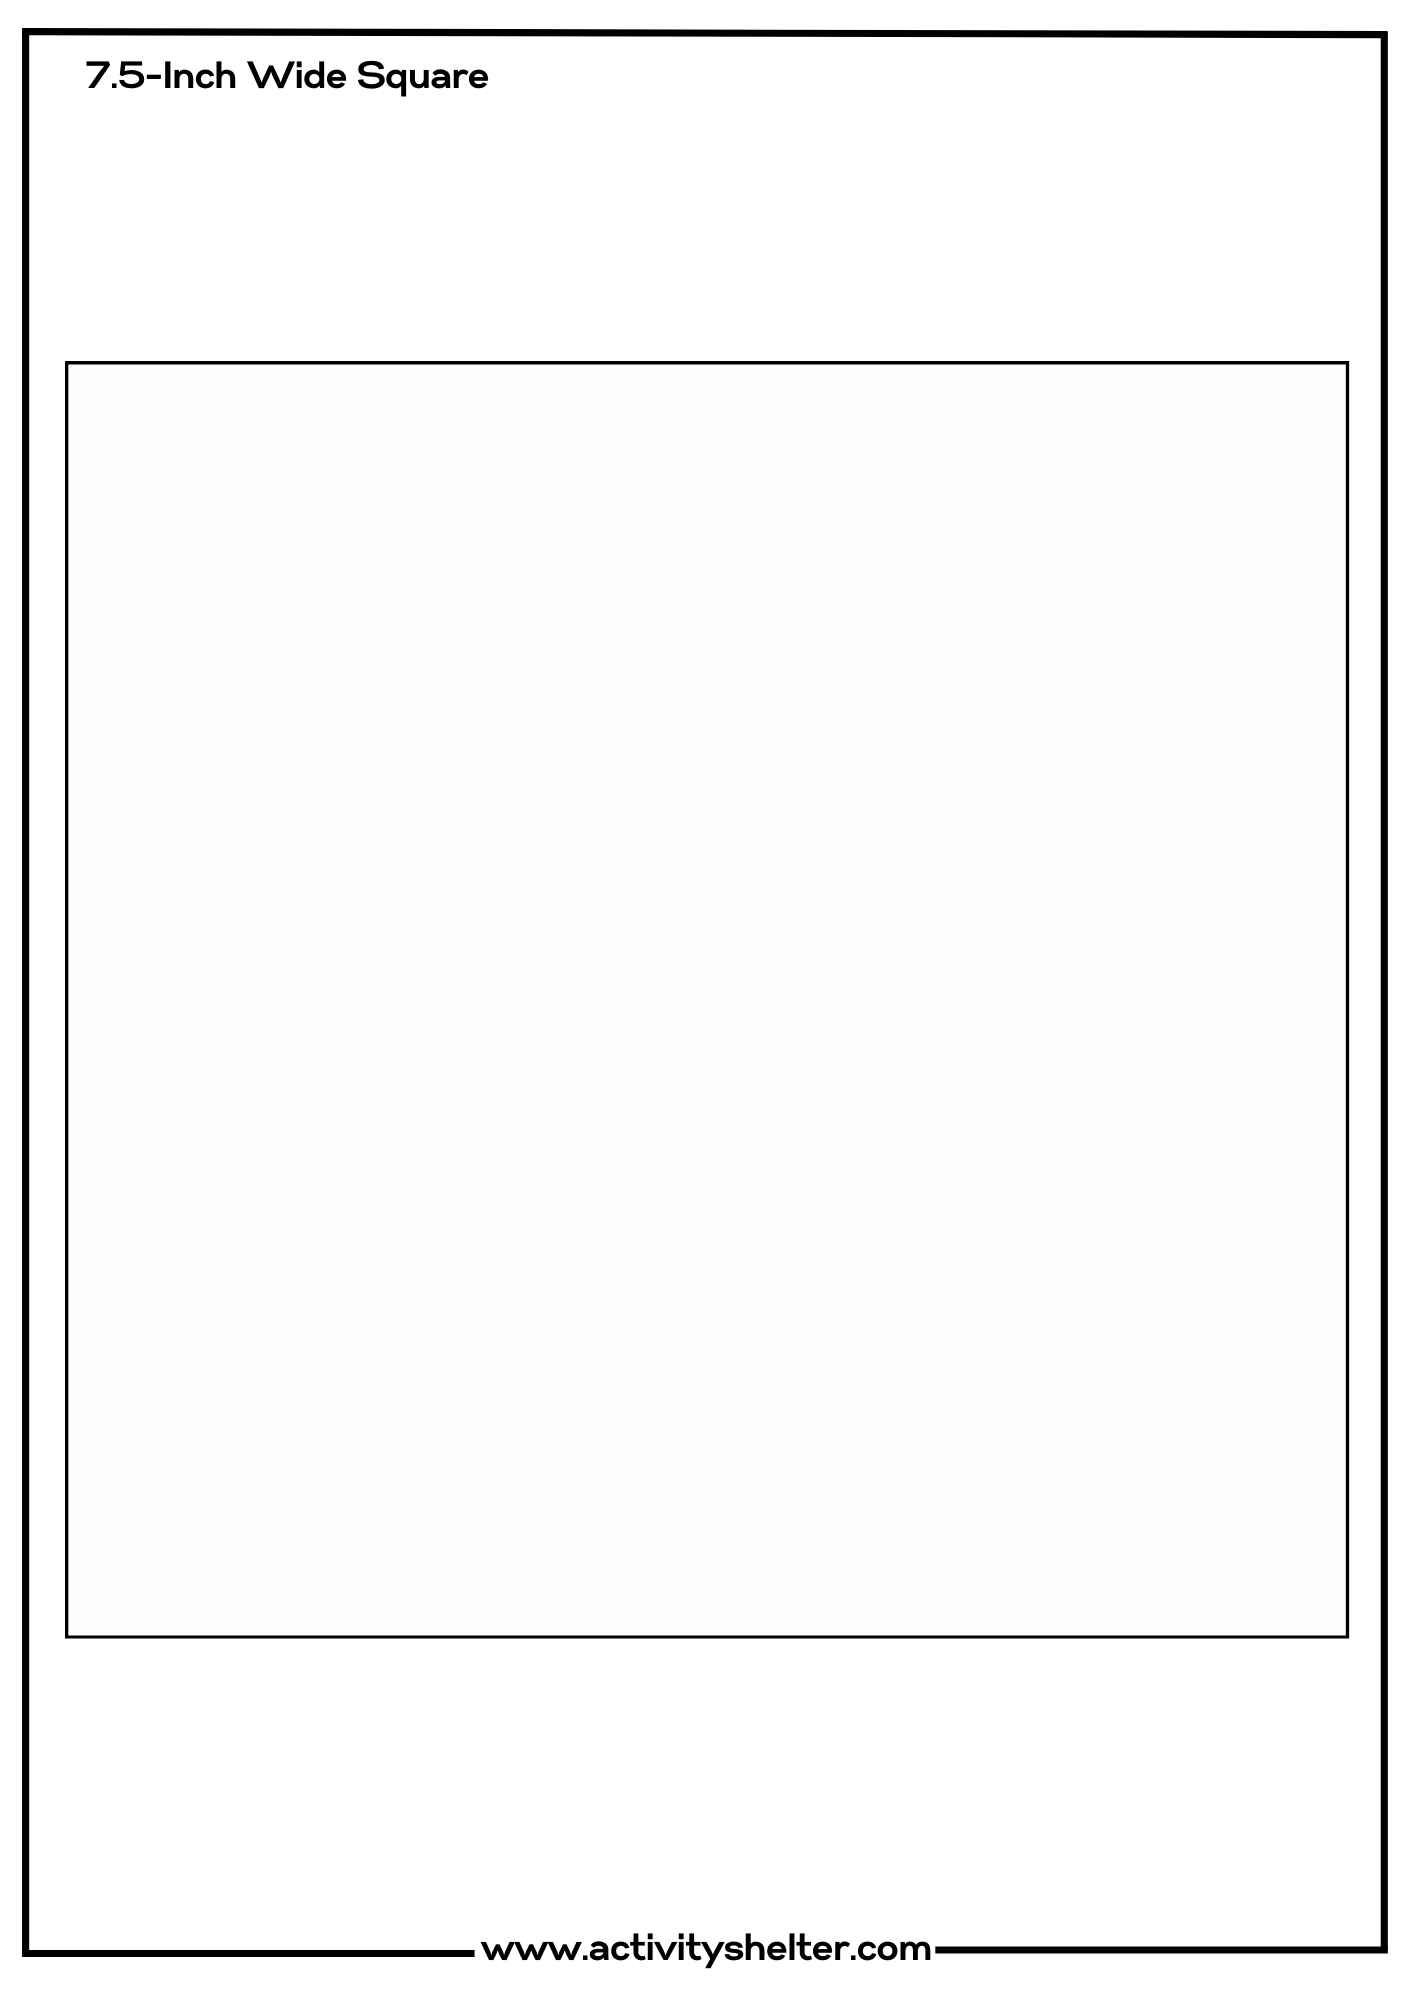 Square Template Printable 7.5-Inch Wide